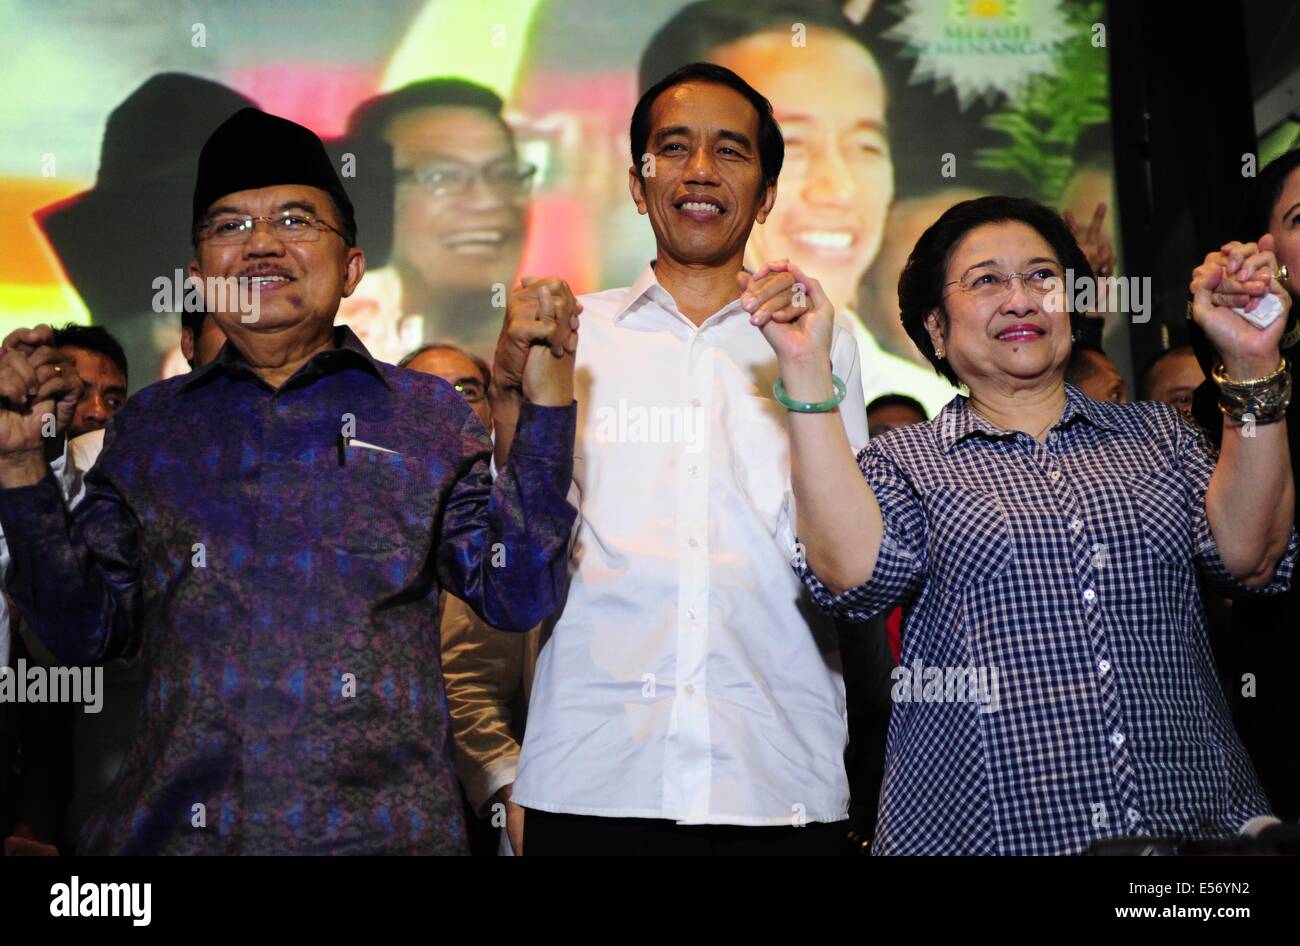 Jakarta, Indonesia. 22nd July, 2014. Chairperson of the Indonesian Democratic Party of Struggle (PDIP) Megawati Soekarnoputri (R), Indonesia's presidential candidate from the PDIP Joko Widodo (C) and his running mate Jusuf Kalla (L) hold hands during a press conference ahead of announcement of recapitulation 2014 presidential election in Jakarta, Indonesia, July 22, 2014. The General Election Commission (KPU) is scheduled to release the vote tally results this afternoon, qualifying the winner of election. Credit:  Zulkarnain/Xinhua/Alamy Live News Stock Photo